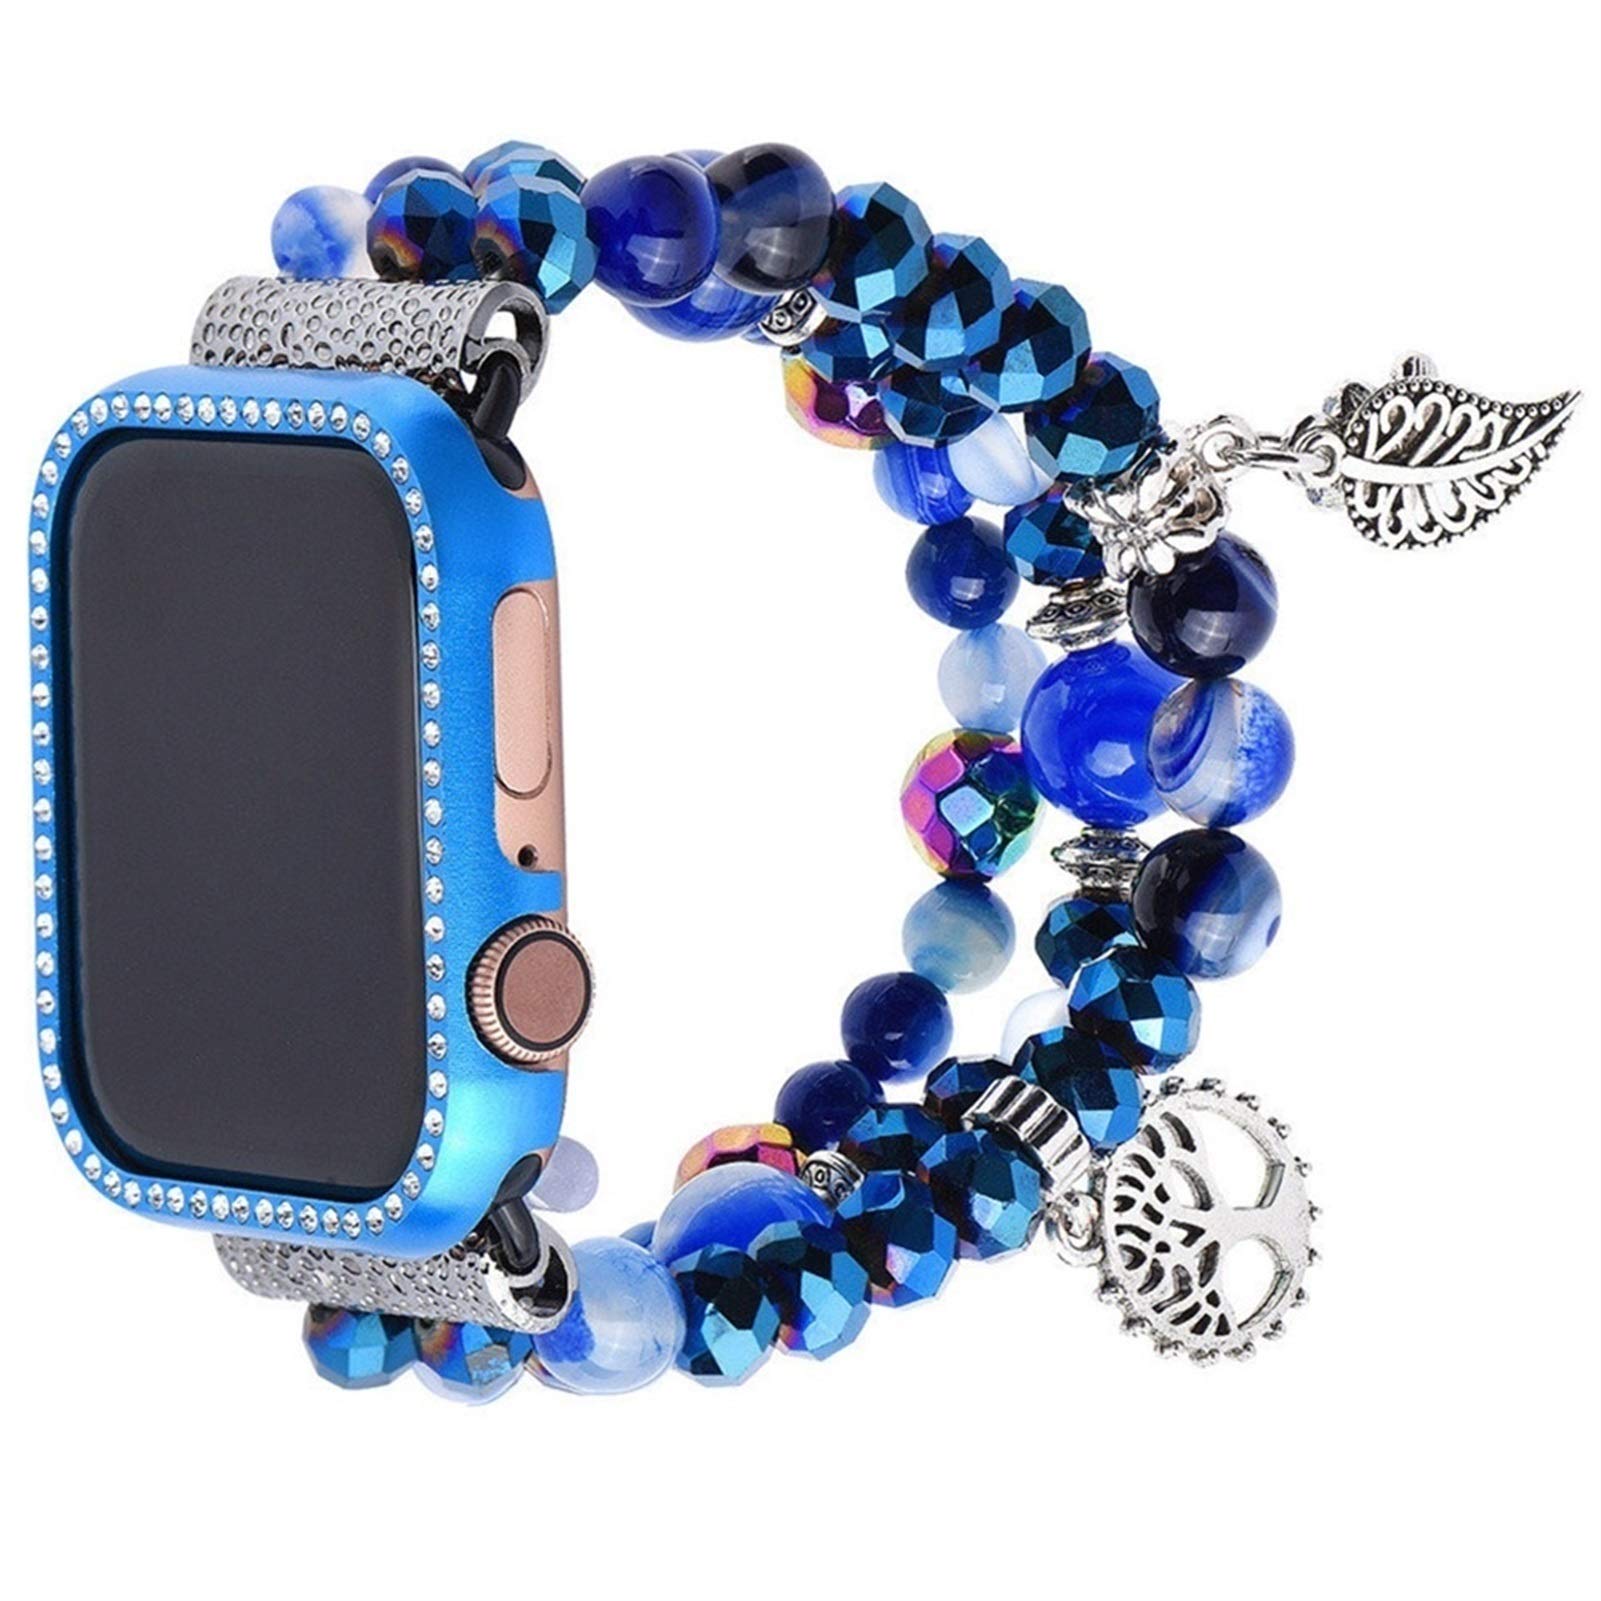 CRFYJ for Apple Watch Band Series 7/SE/6/5/4/3/2/1 Strap 38mm 40mm 42mm 44mm Diamond Metal Cover Agate Beads Bracelet (Color : Watchband, Size : 40mm)